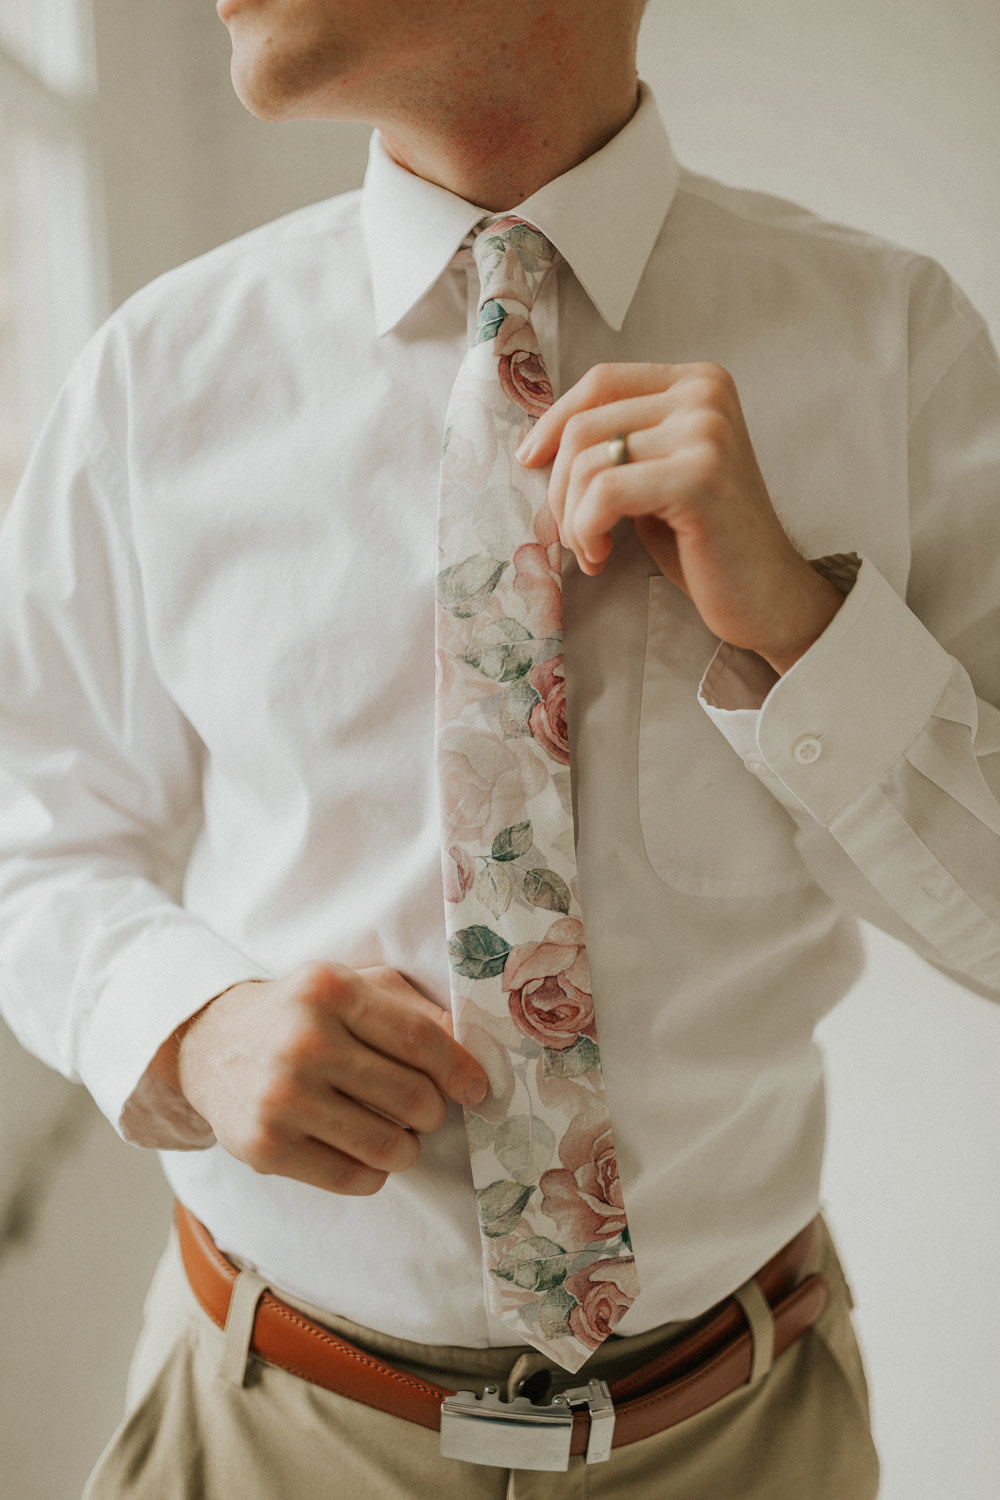 Smitten tie worn with a white shirt, brown belt and khaki pants.